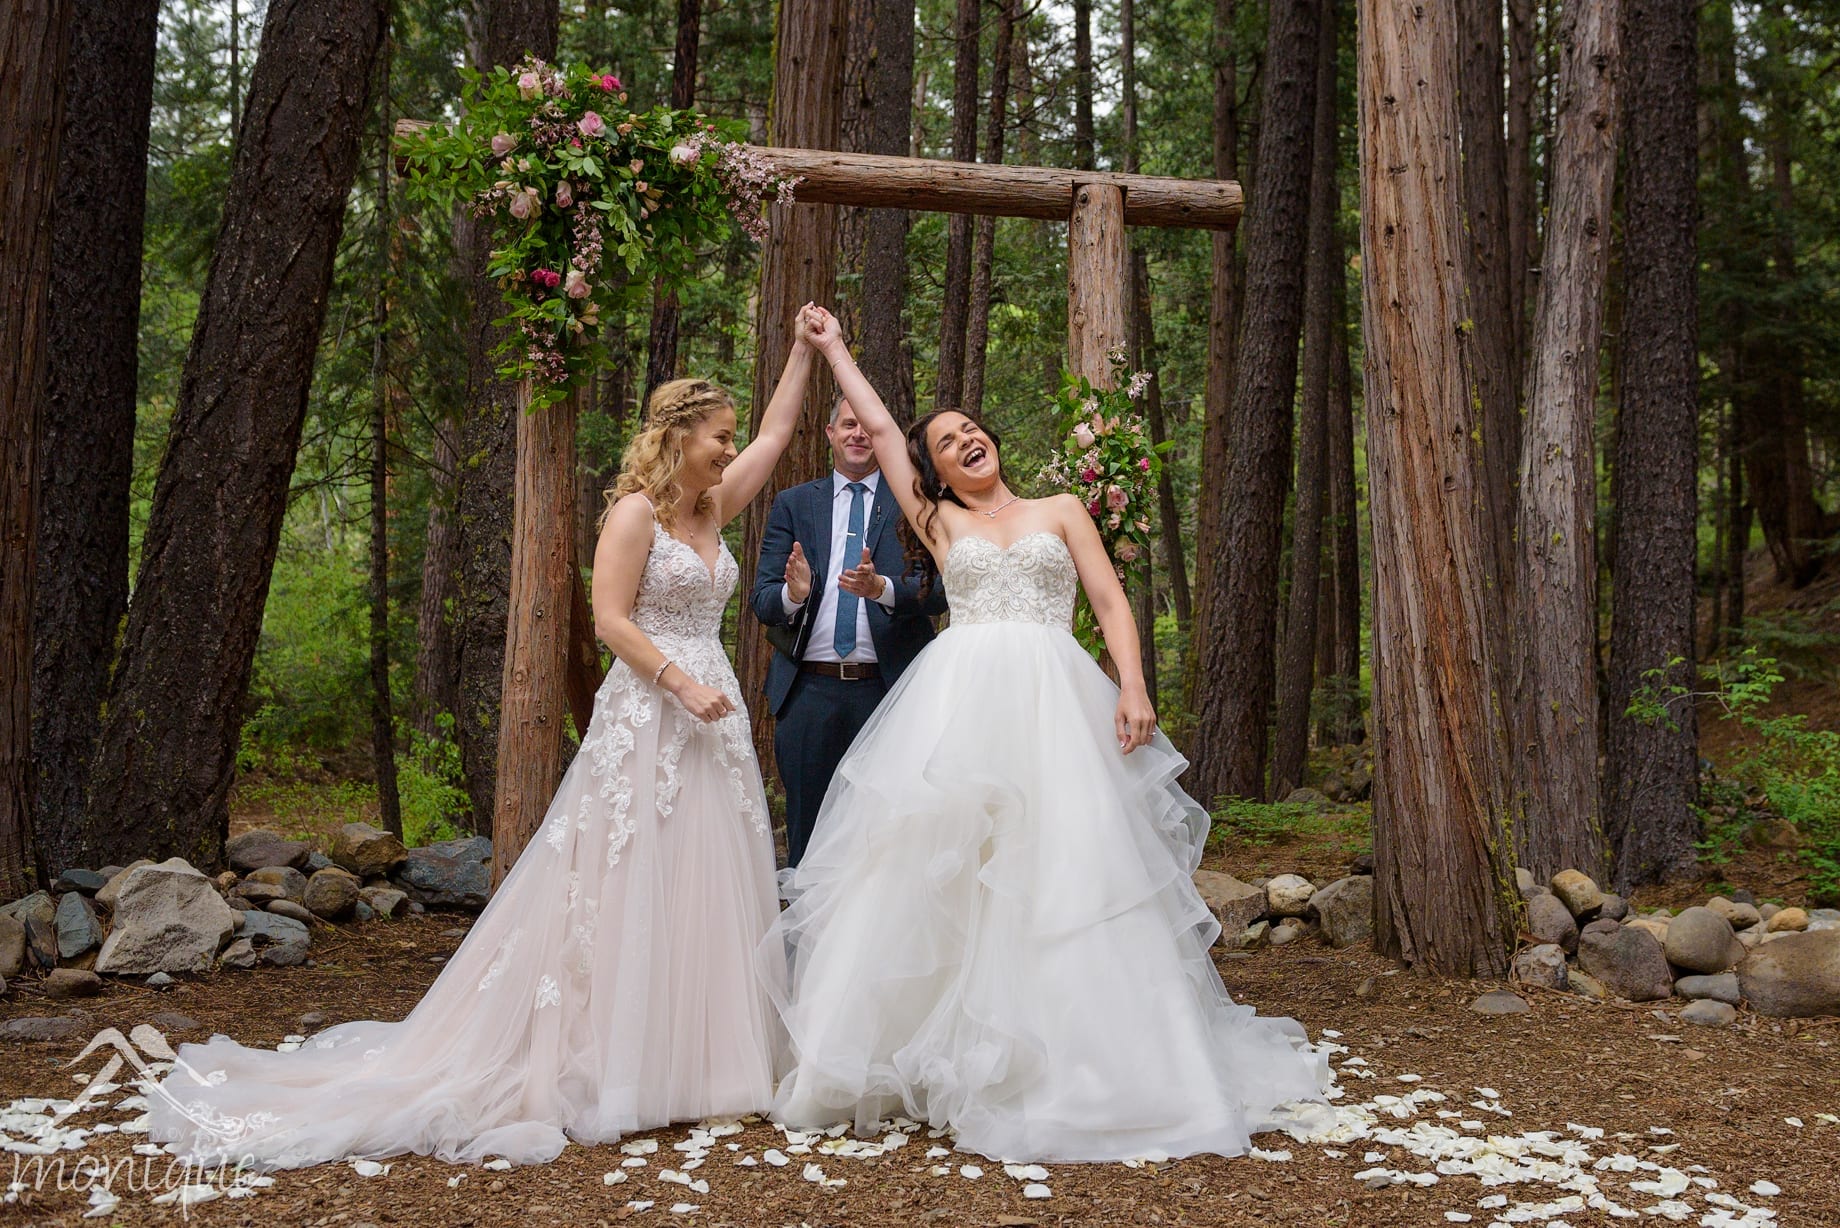 Twenty Mile House wedding photography, same sex weddings, two brides, ceremony in trees by Photography by Monique